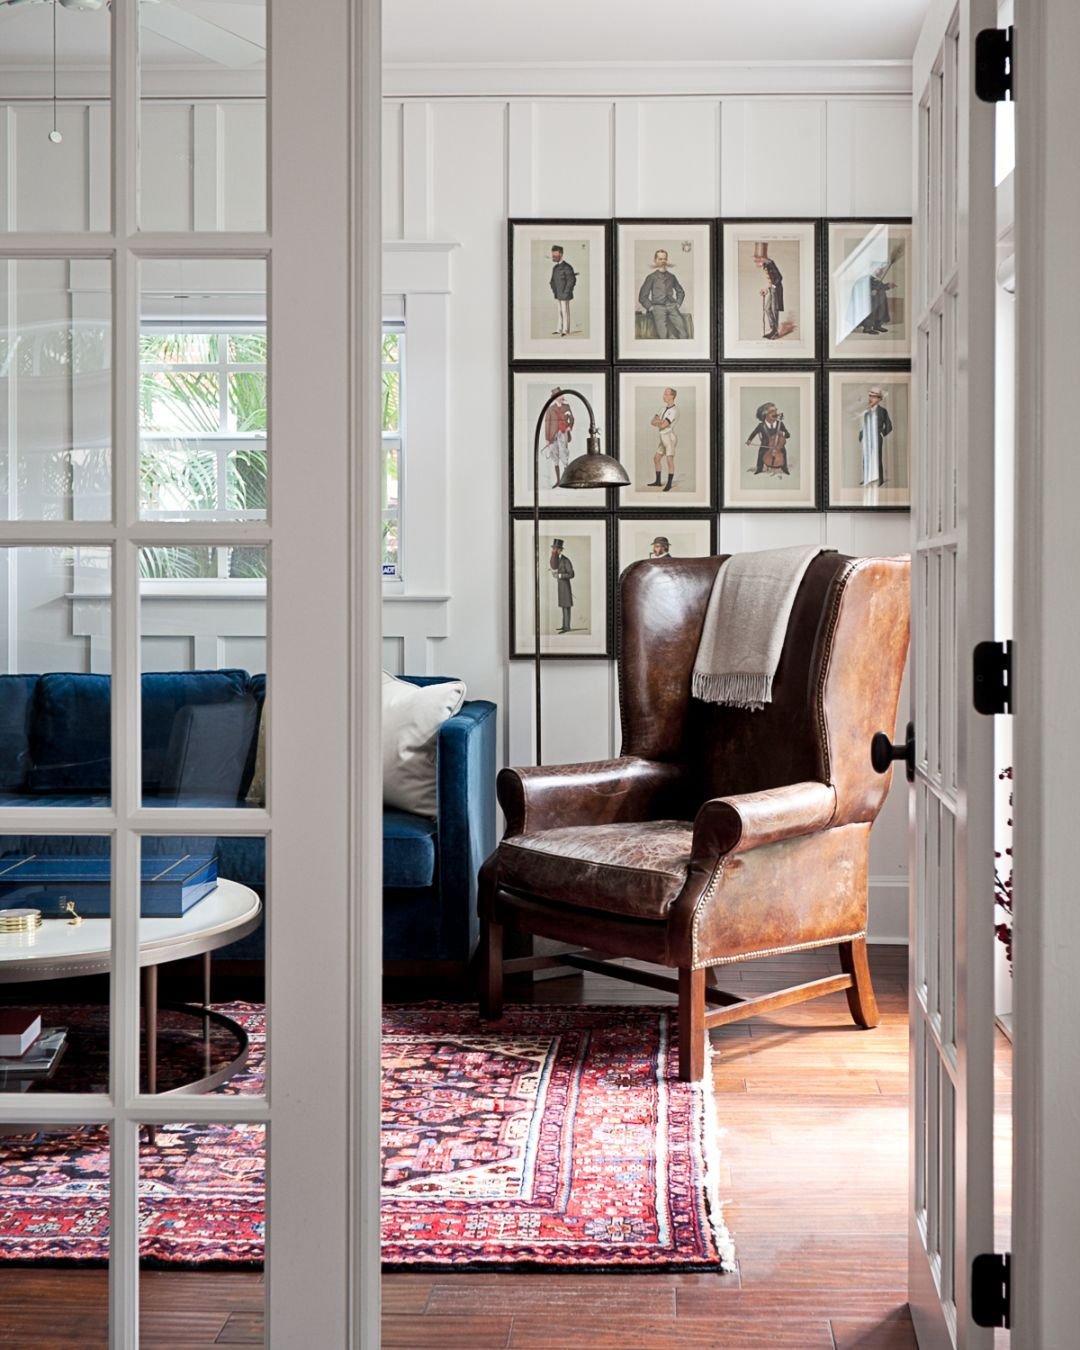 This 1920's historic home had a unique charm of it's own-- it was so easy and fun to bring out it's true character even more with classic furnishings and heirloom pieces!

This was one of my favorite rooms, with a cozy blue velvet sofa and a neatly o